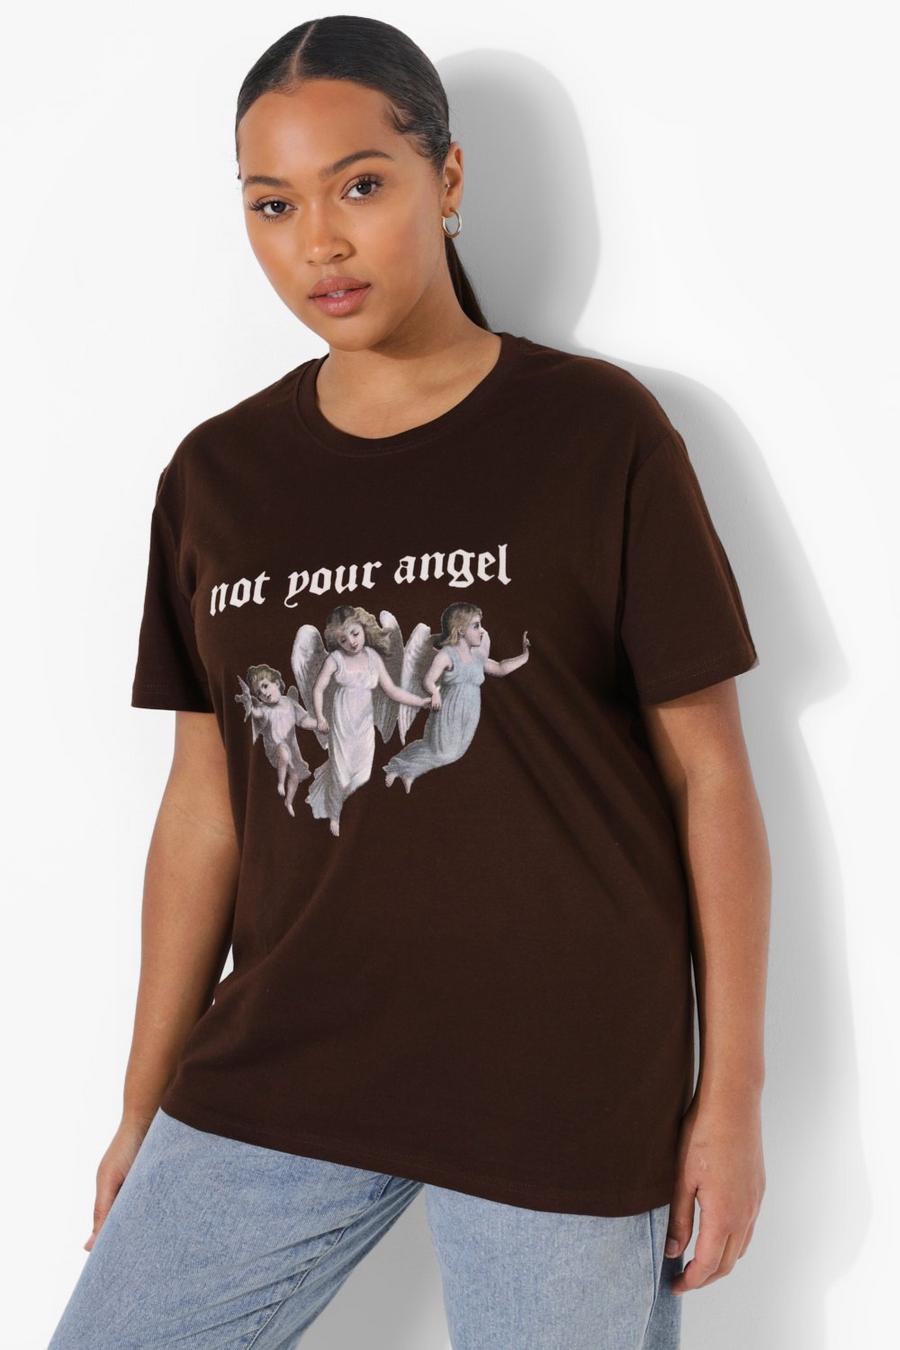 craft Undtagelse Intensiv Plus Not Your Angel T-shirt | boohoo